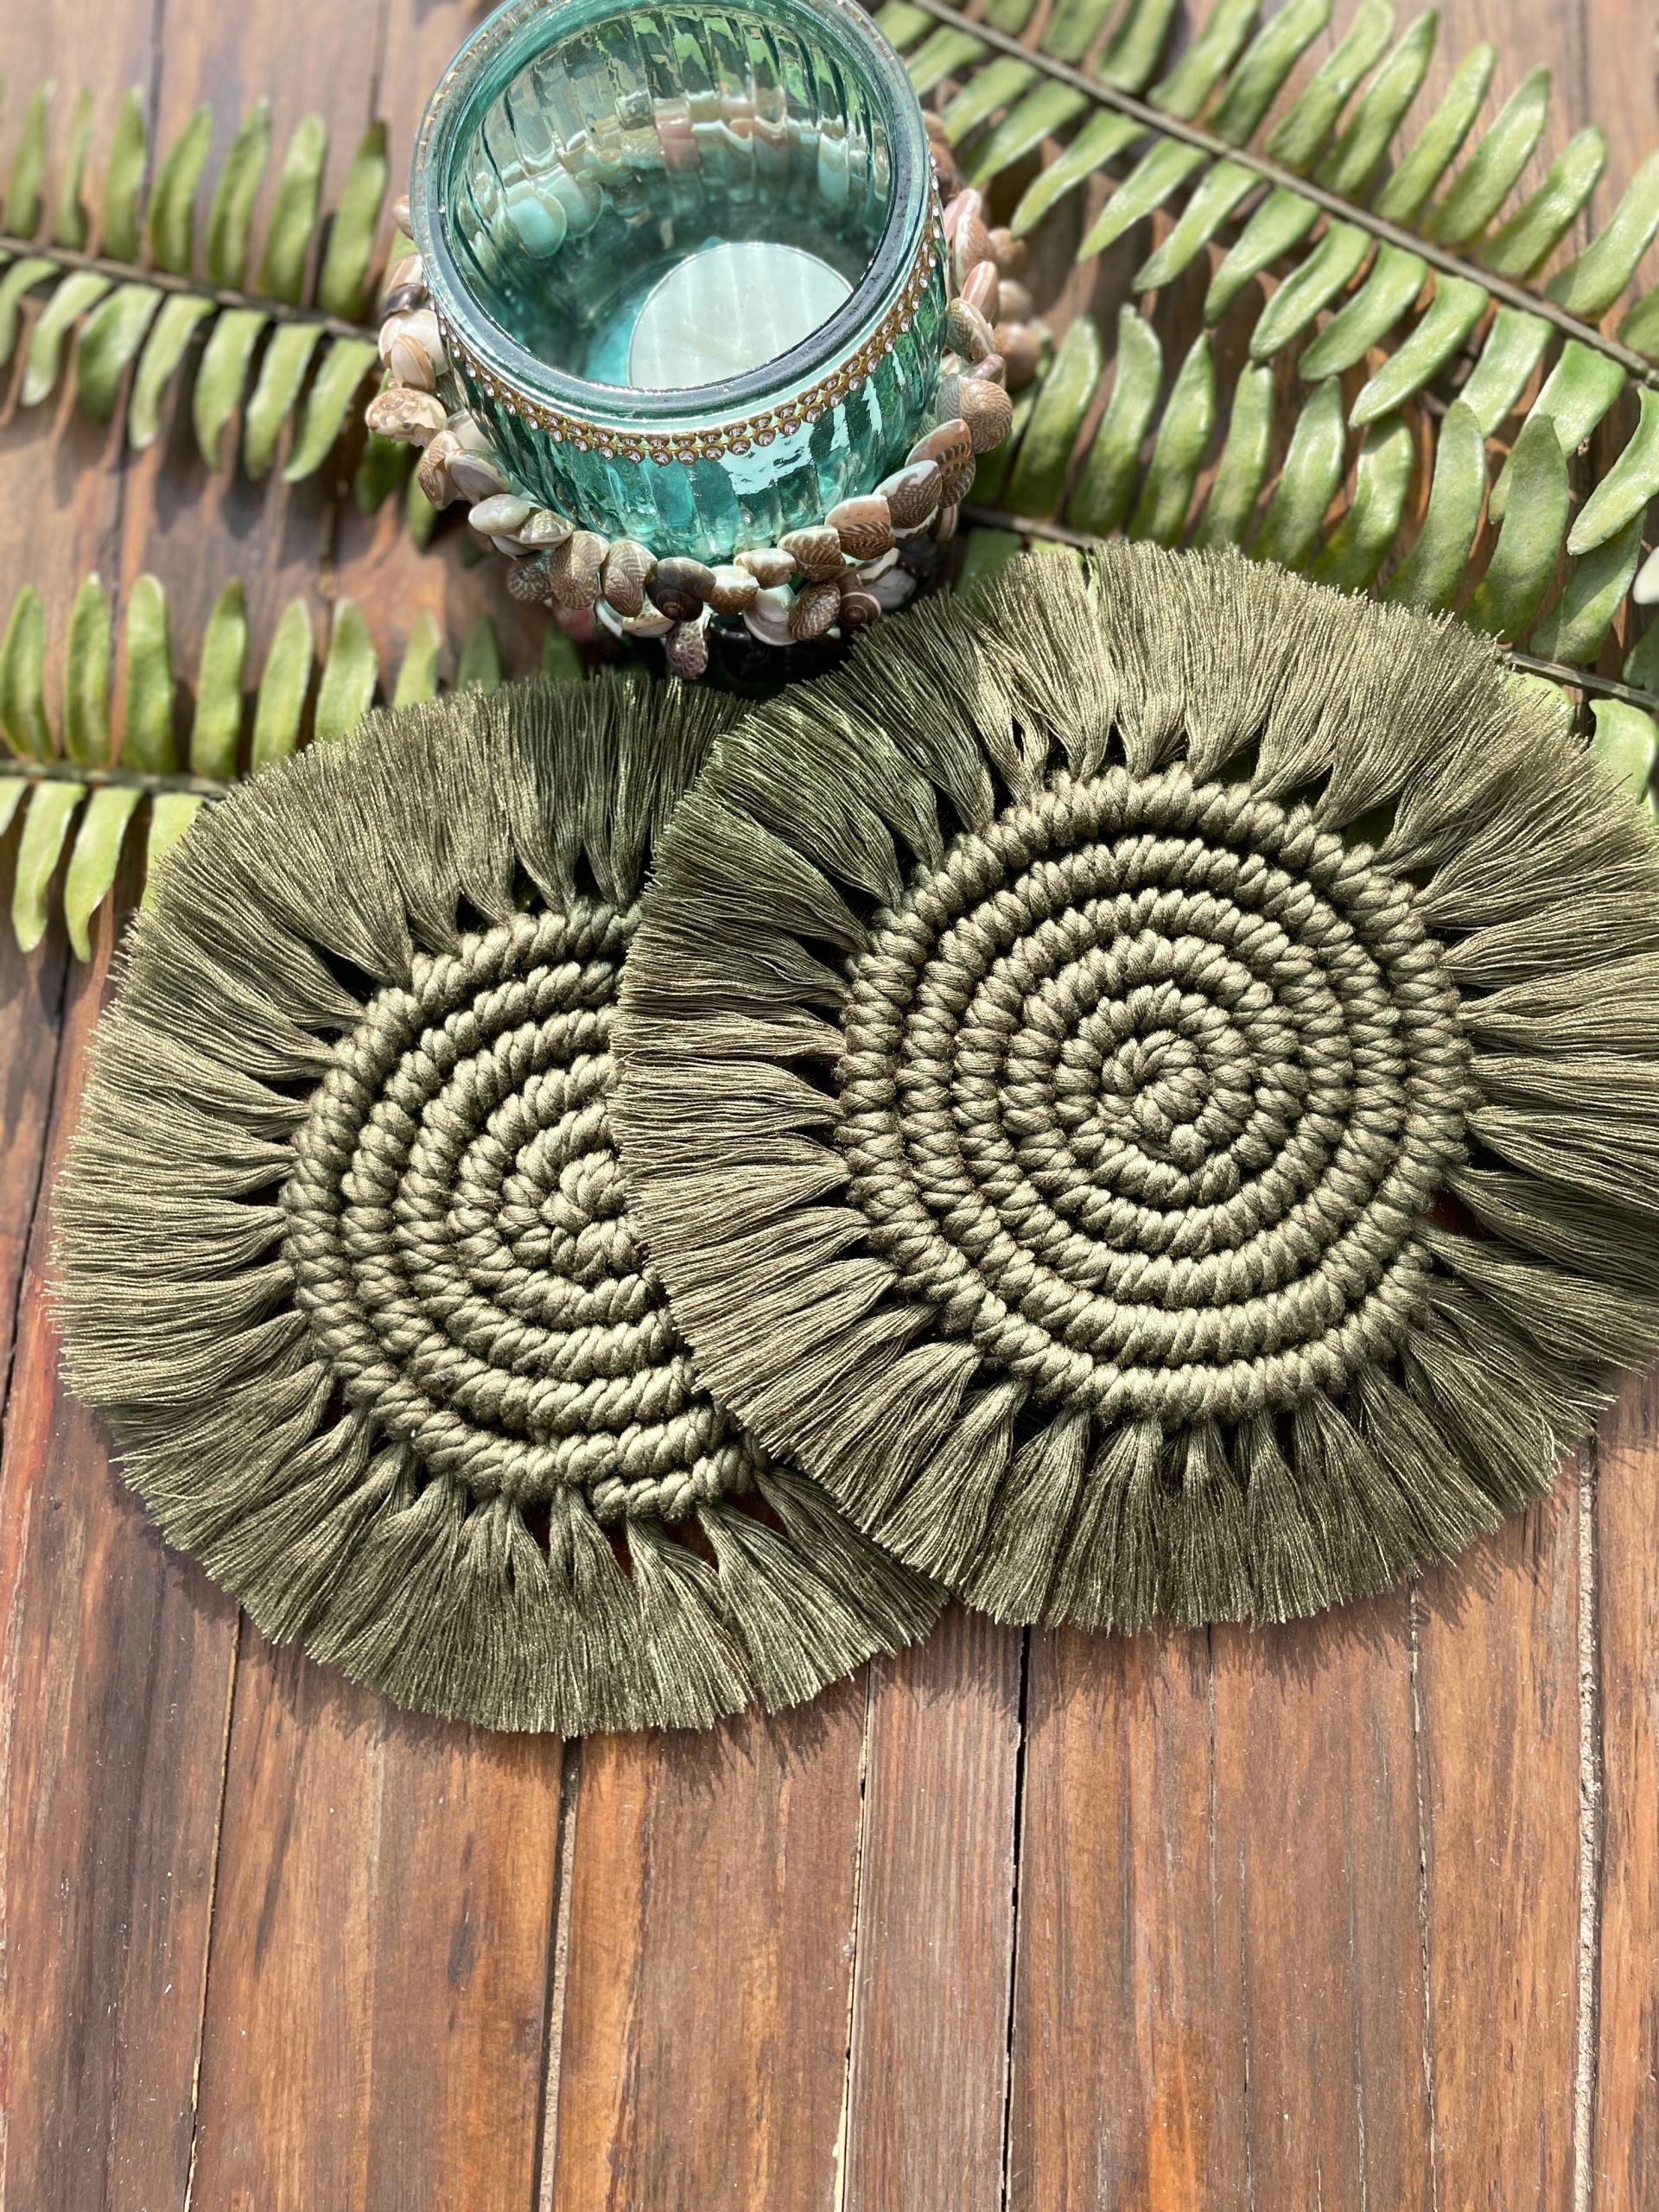 Product: Handcrafted Coaster green spiral